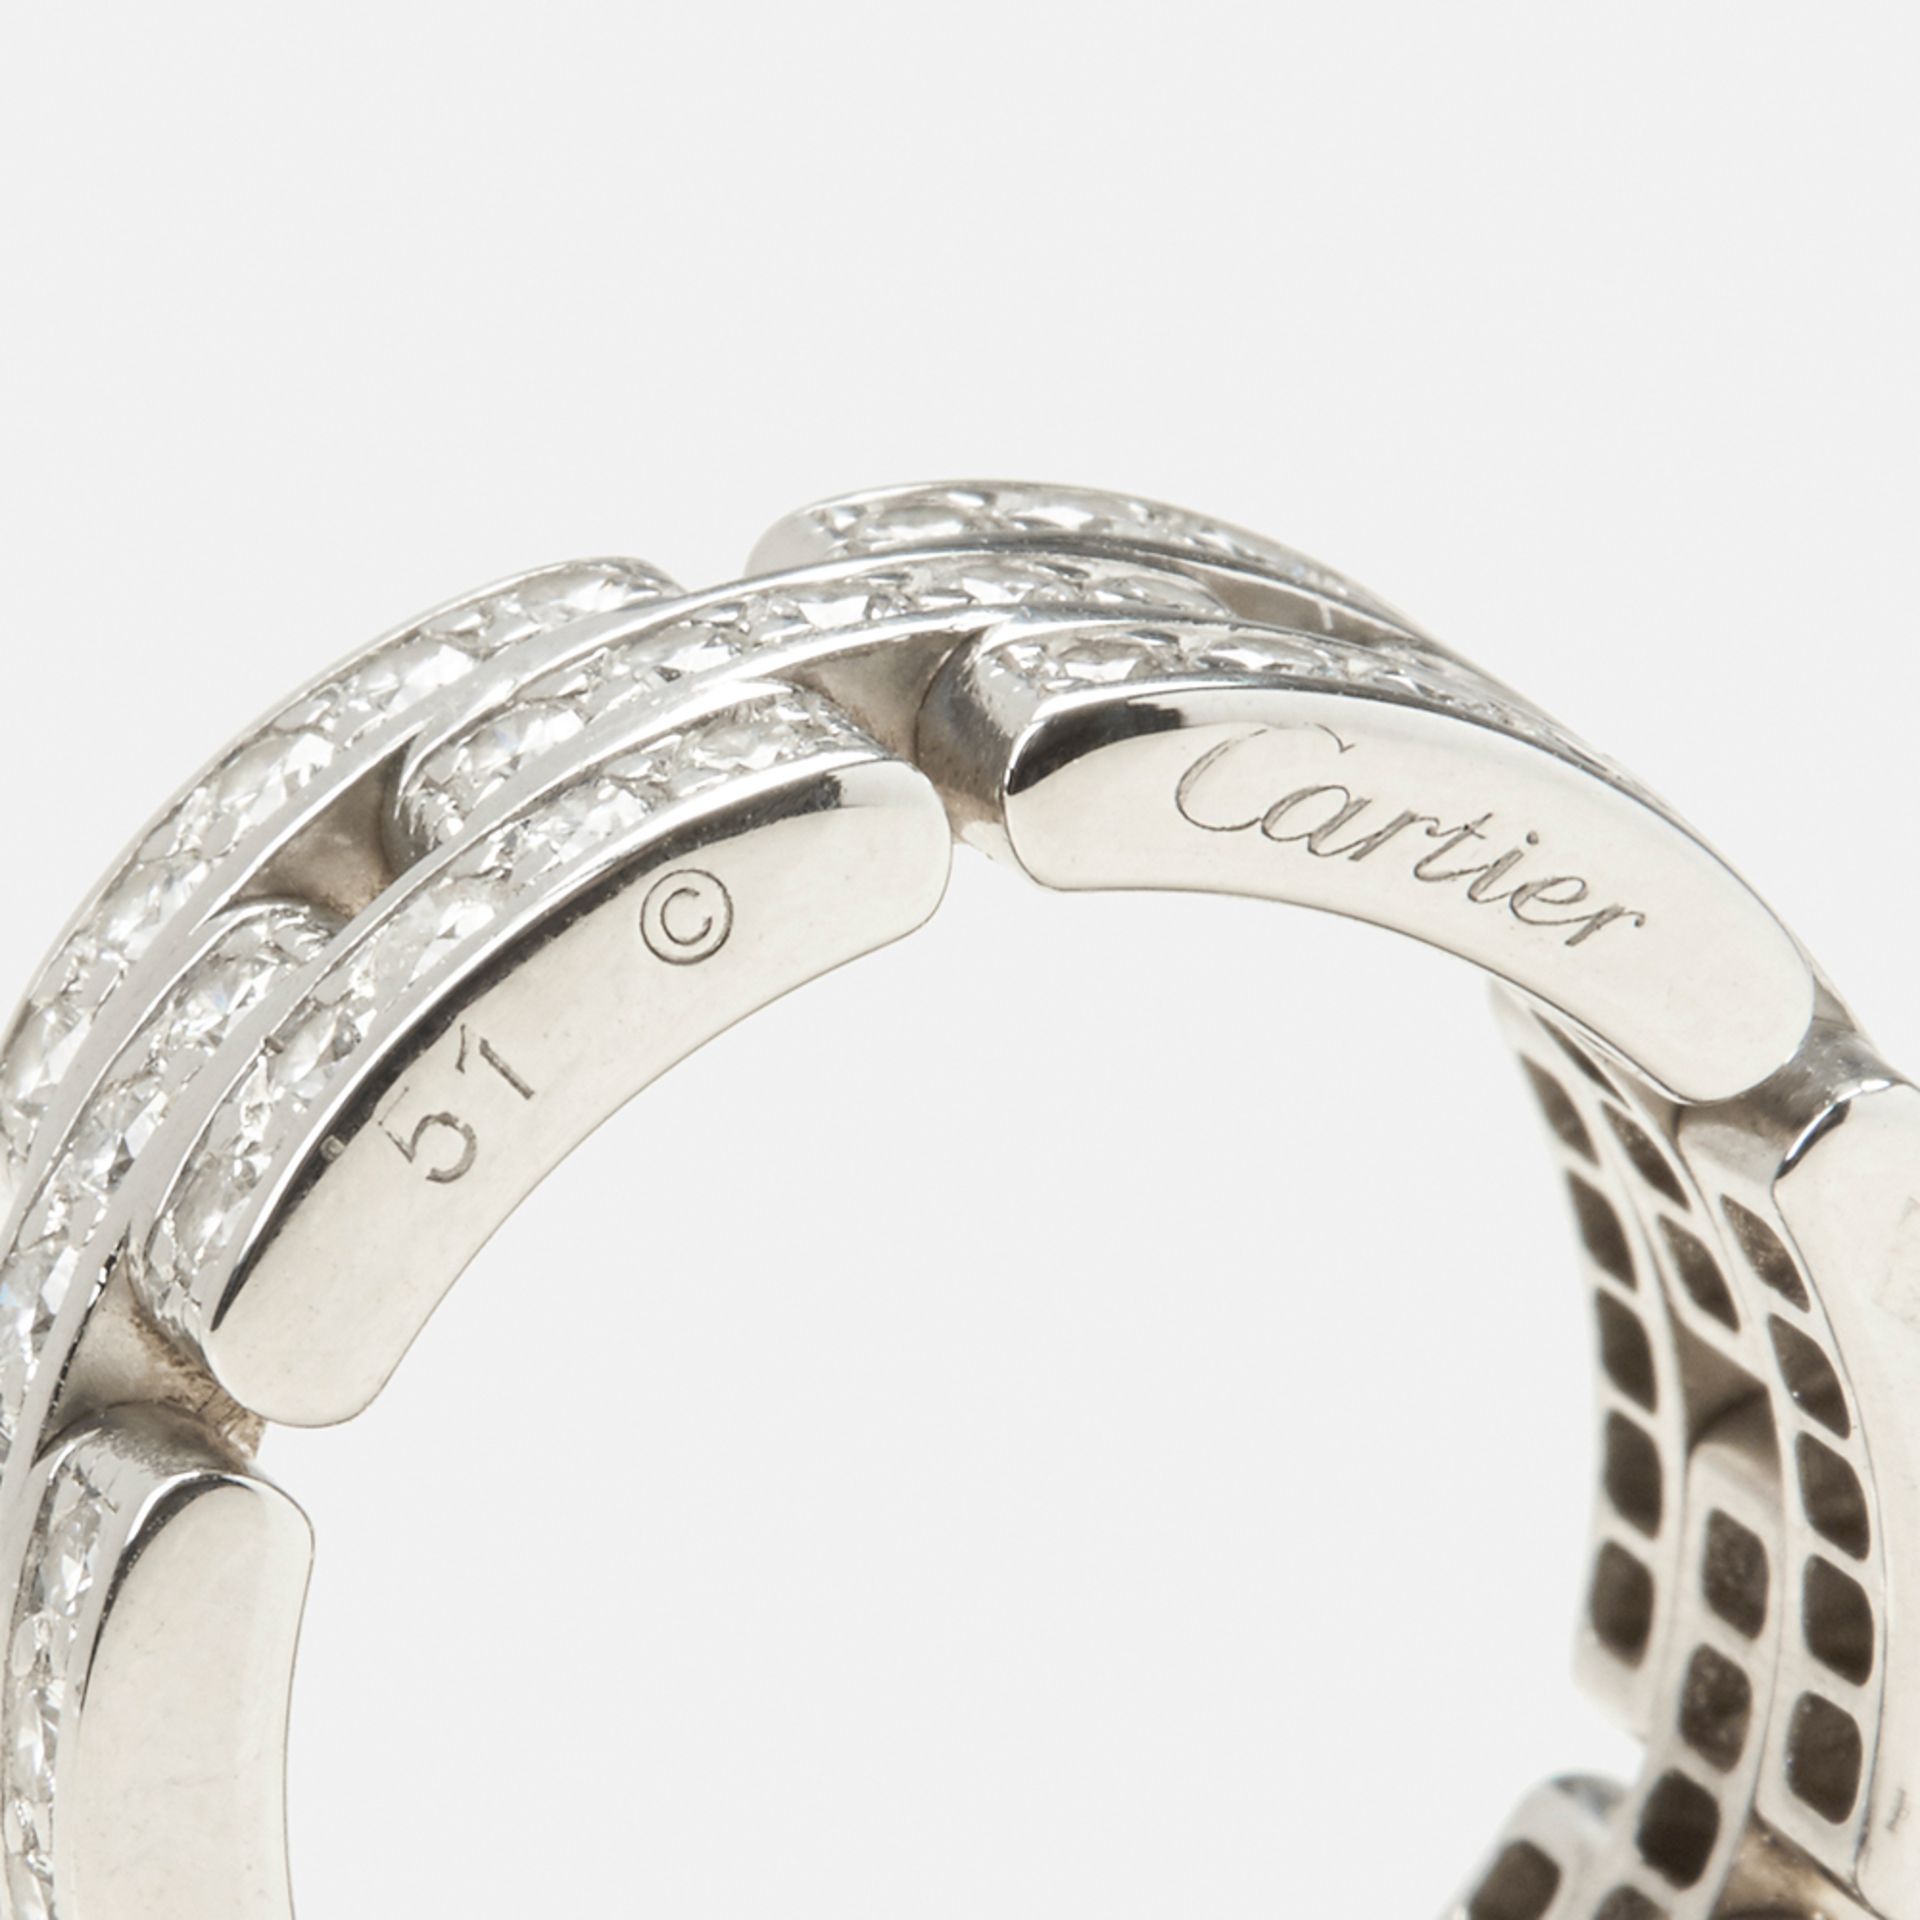 Cartier 18k White Gold Diamond Maillon Ring - Image 8 of 9